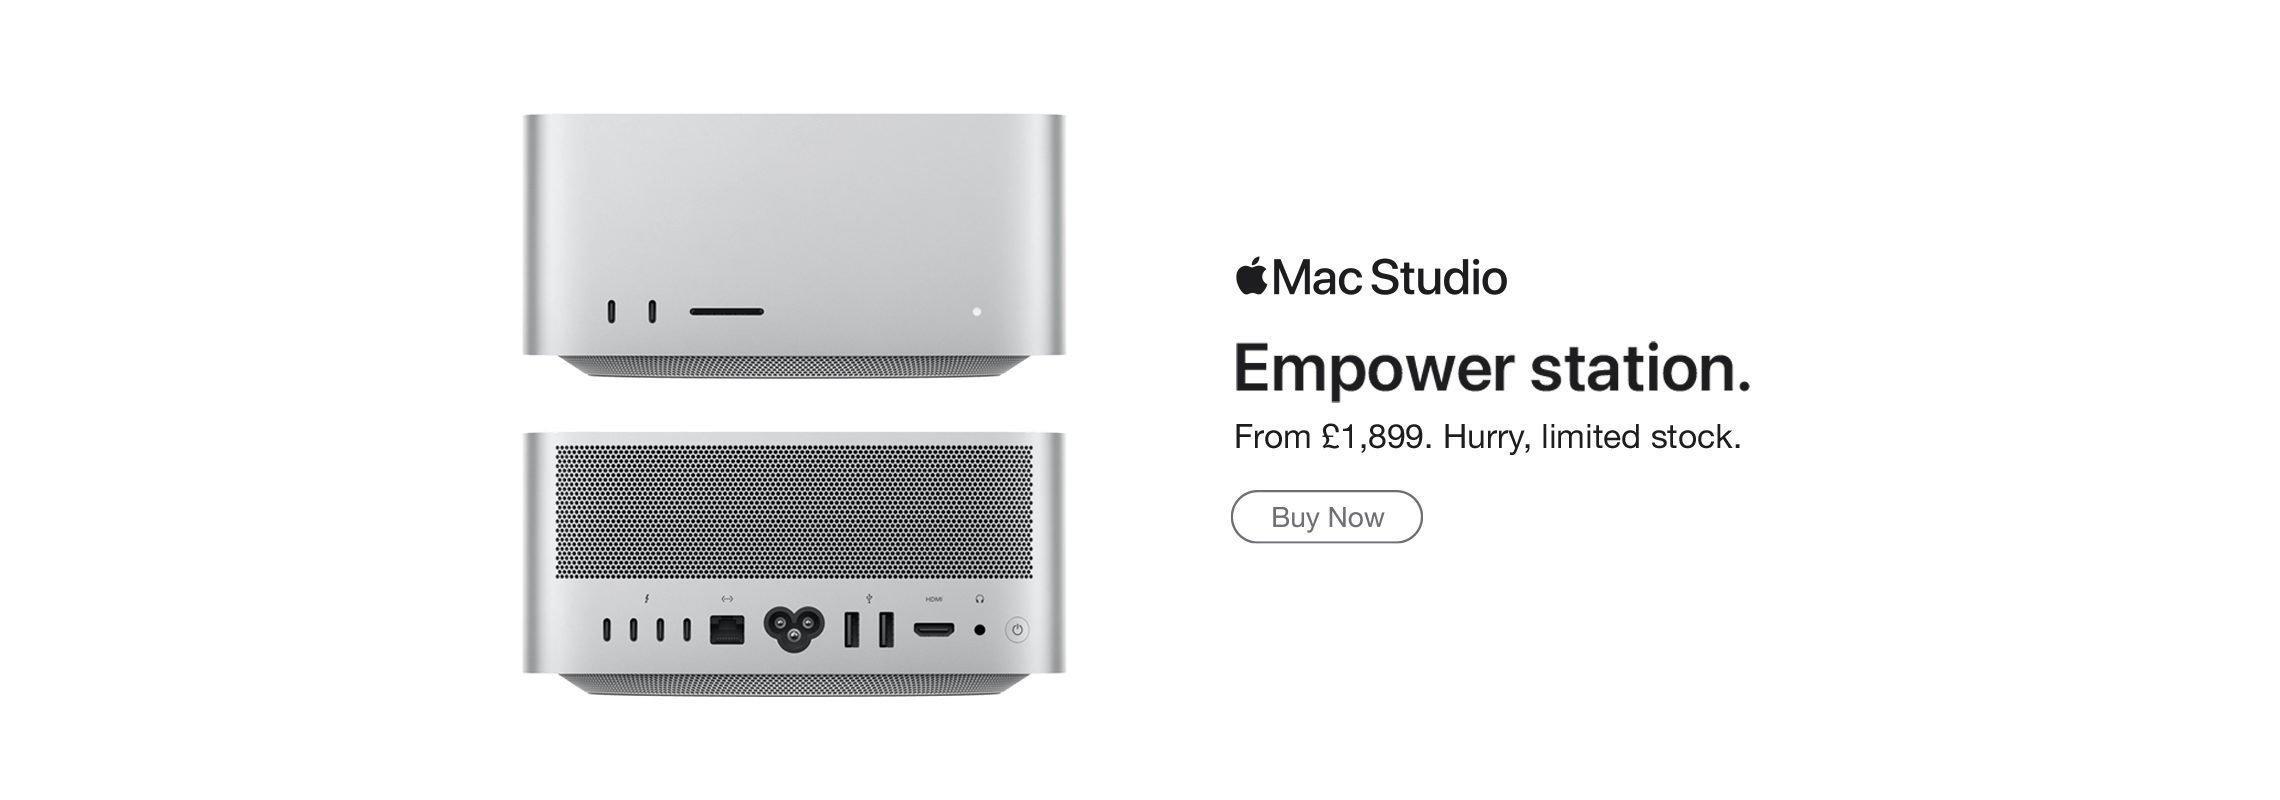 Mac Studio. From £1,899. Hurry, limited stock.